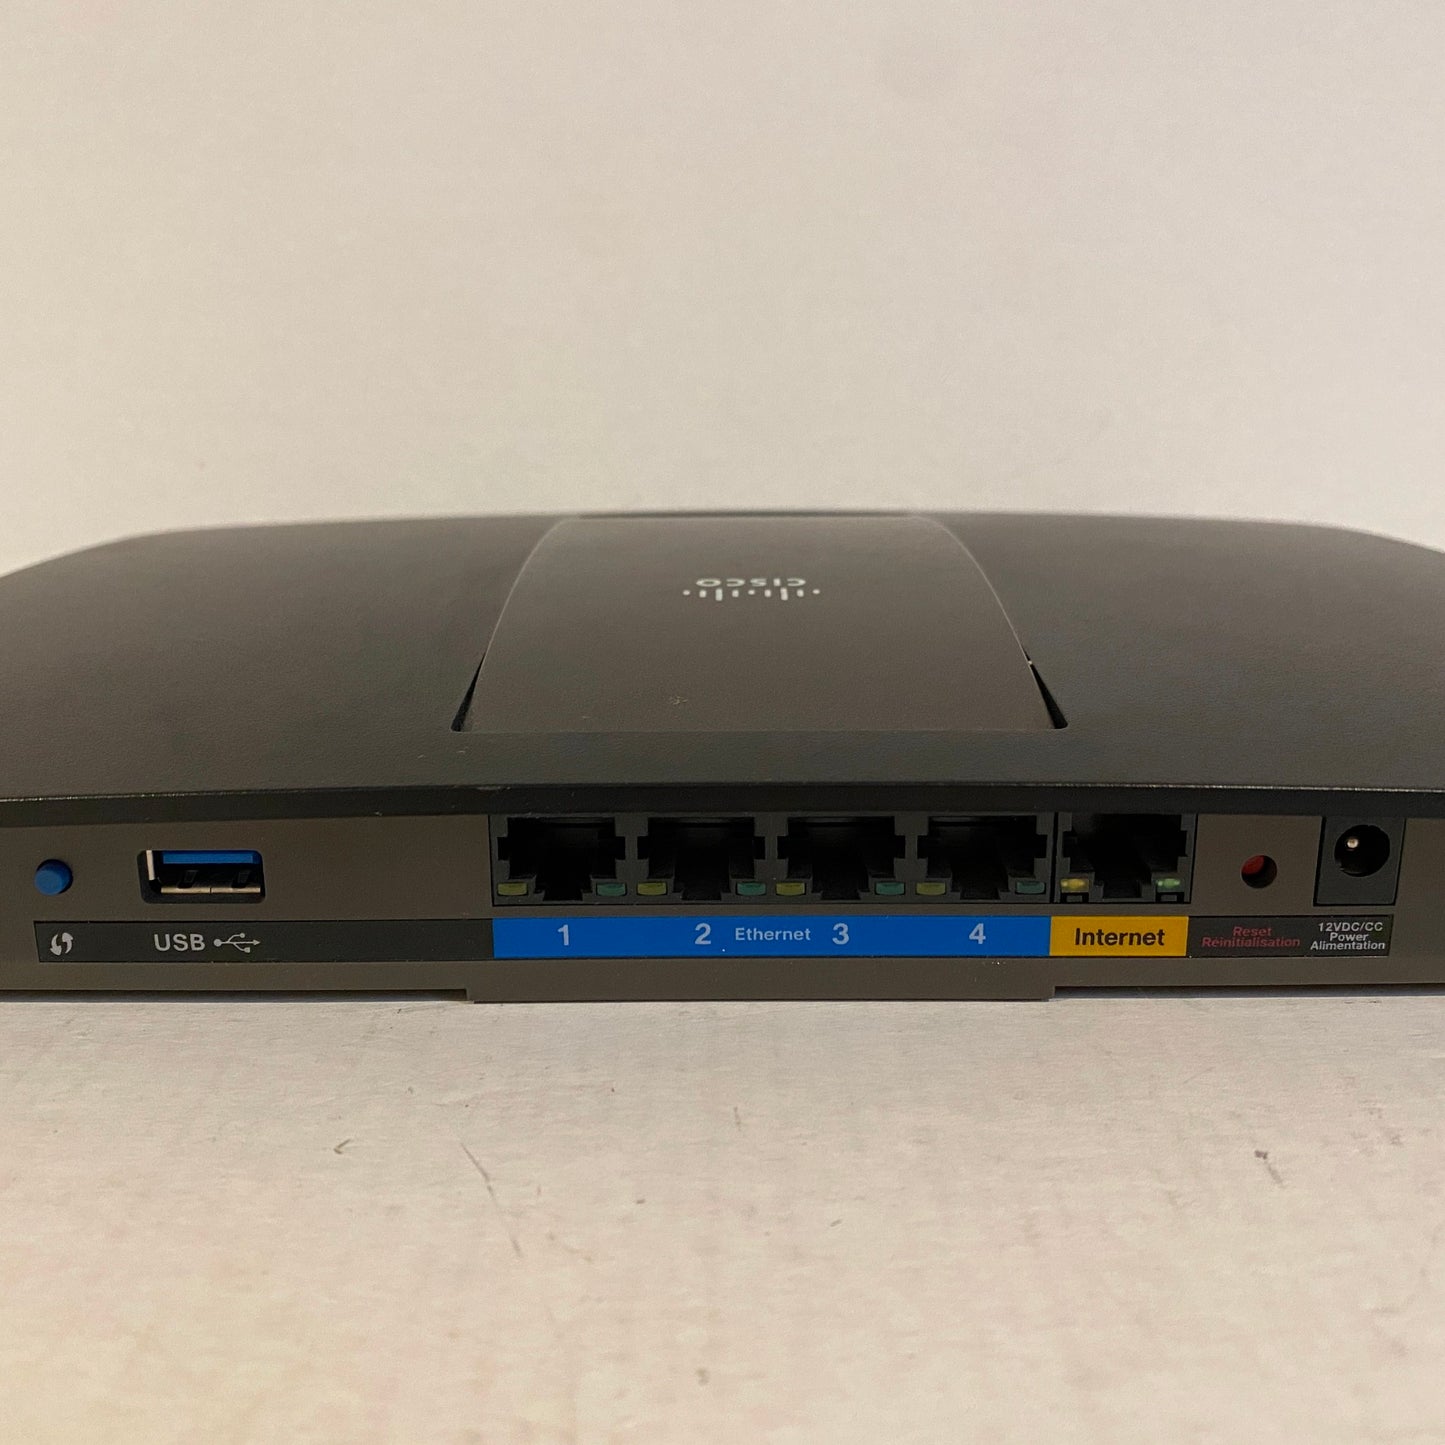 Cisco Linksys Wireless Router and Four Port Switch - EA6300V1